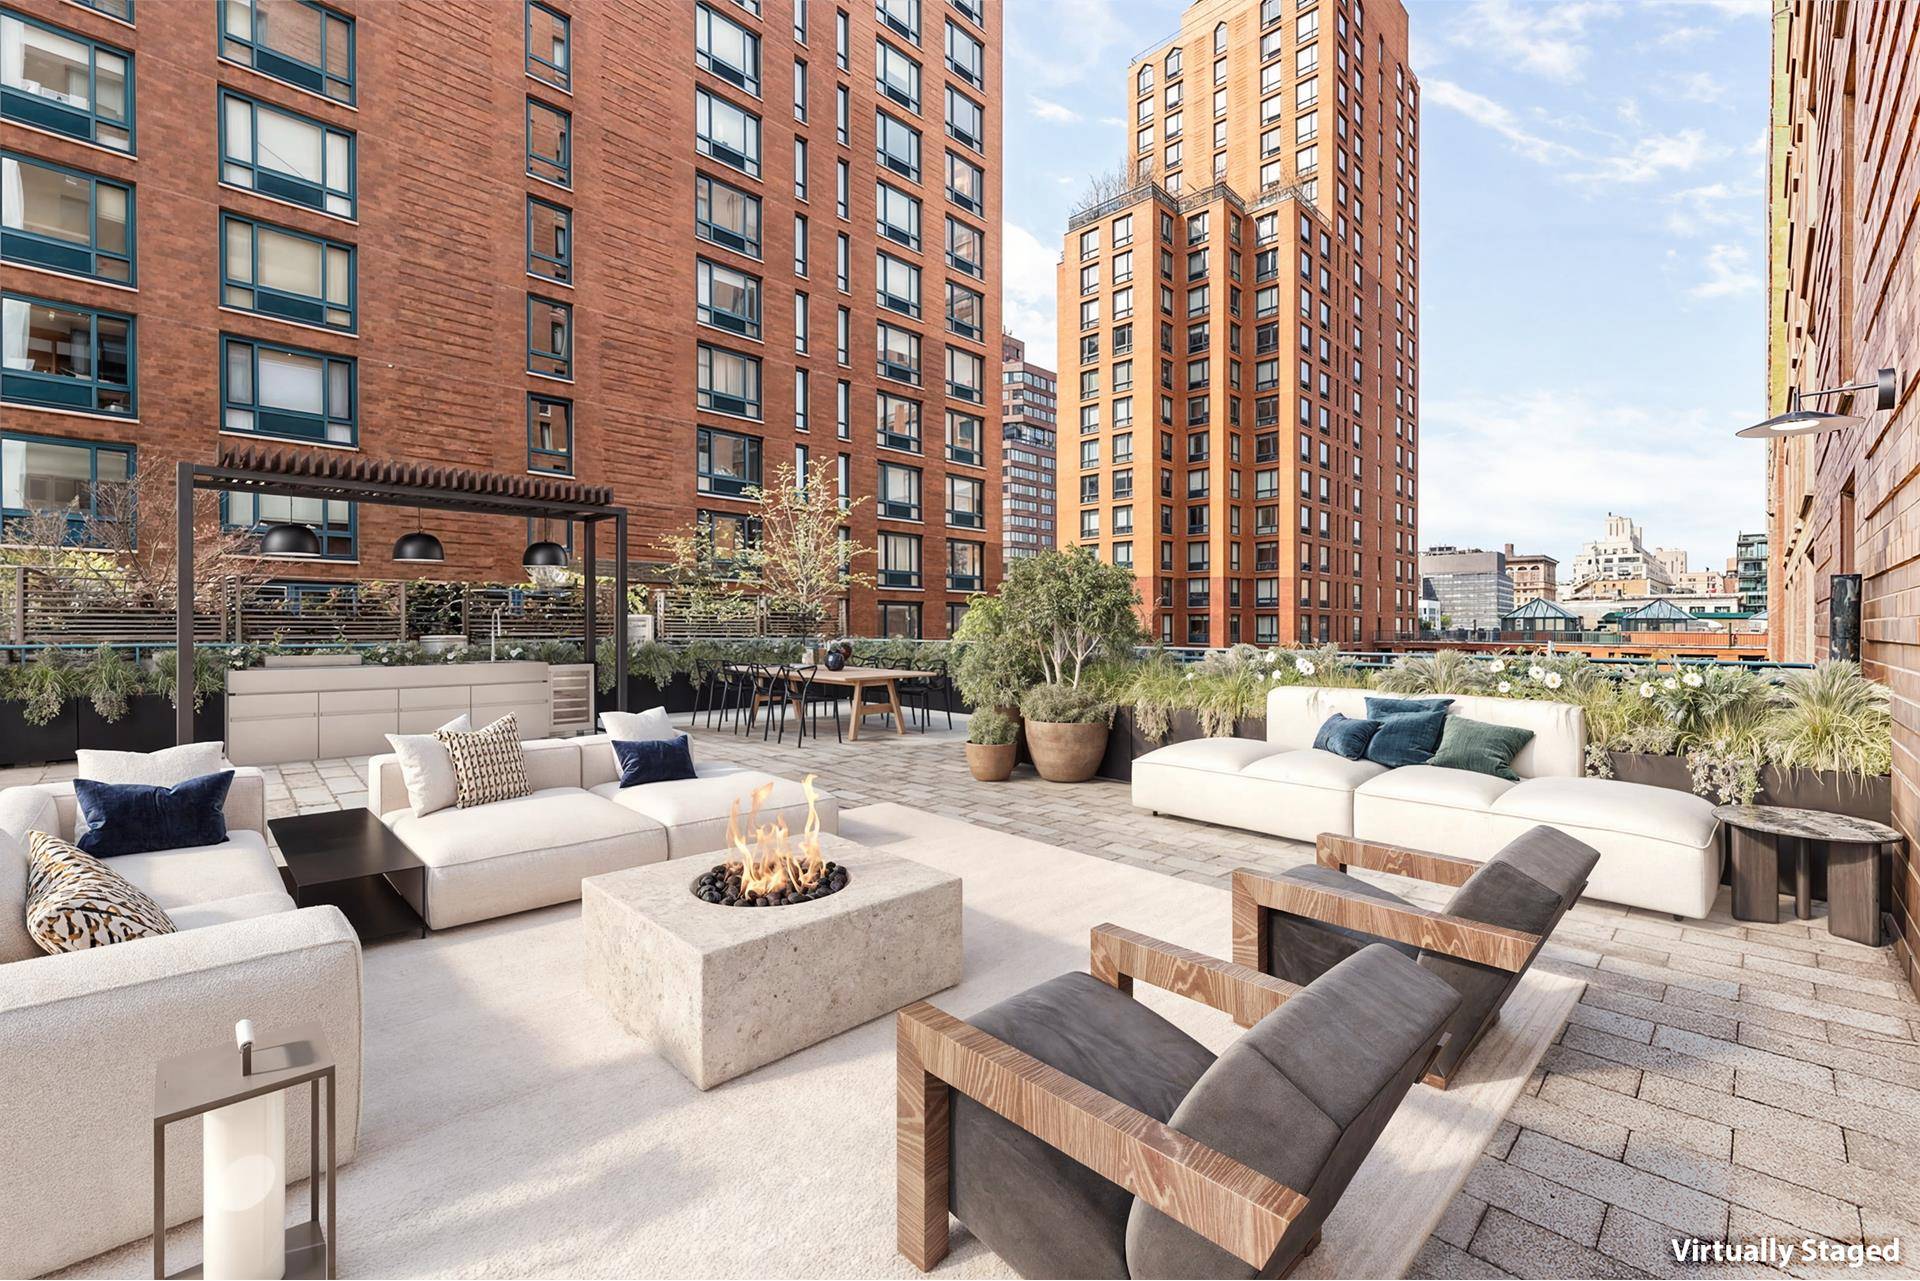 A rare opportunity to create your own bespoke urban oasis nestled in the heart of Union Square !